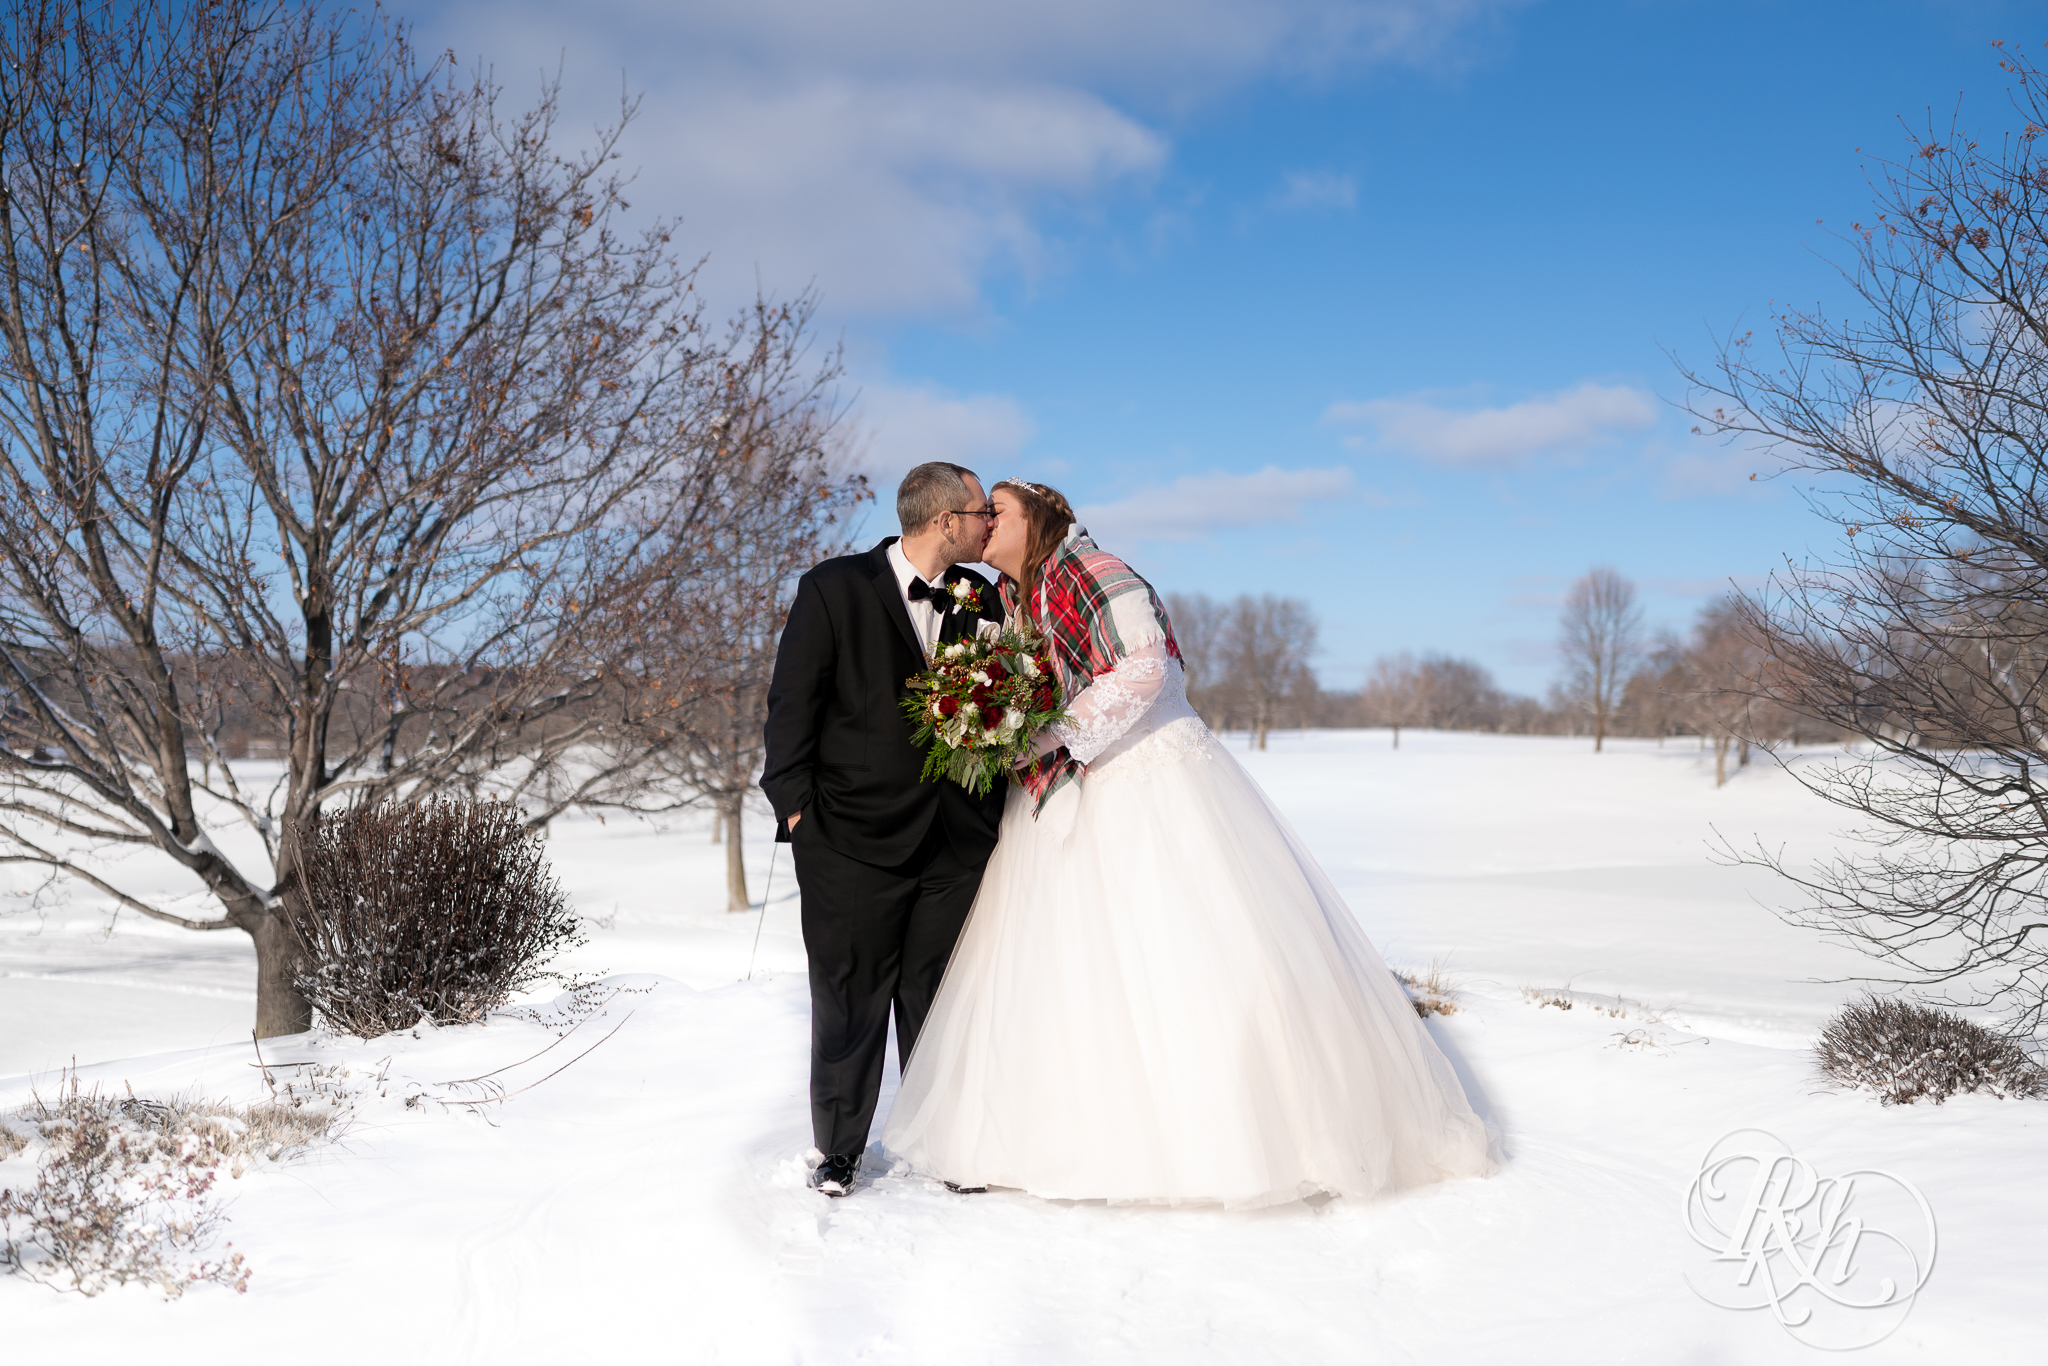 Bride and groom kissing in the snow at Christmas wedding at Oak Glen Golf Course in Stillwater, Minnesota.